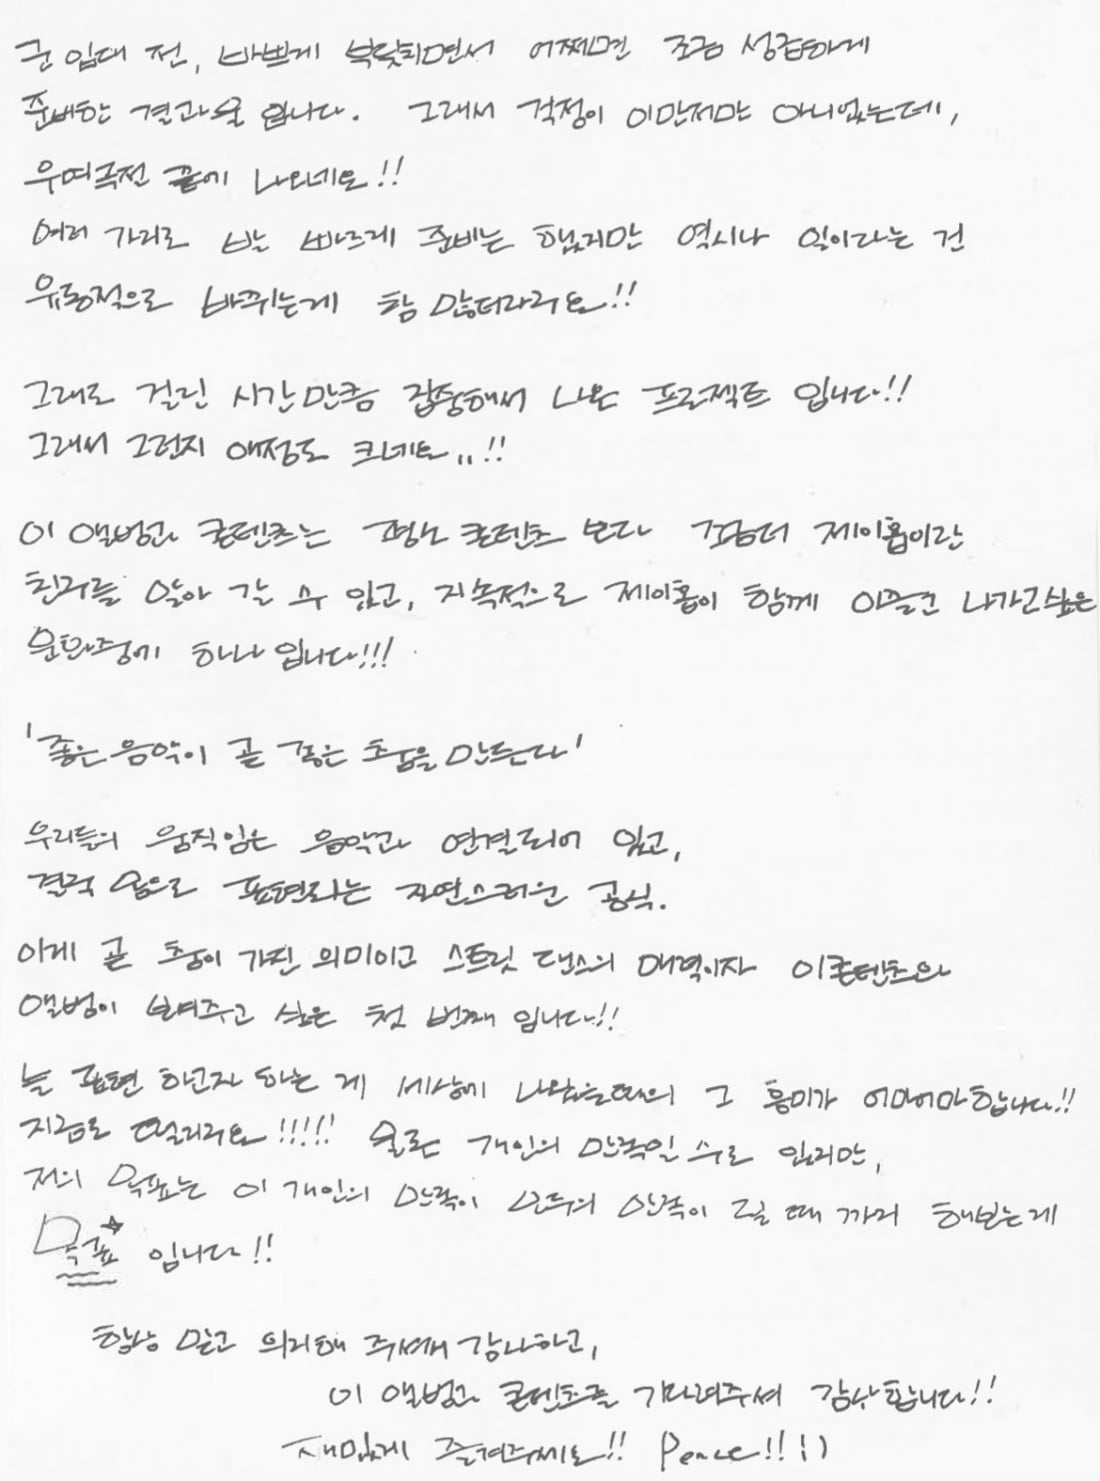 BTS J-Hope, ‘surprise’ news from the military… Handwritten letter ahead of new album release